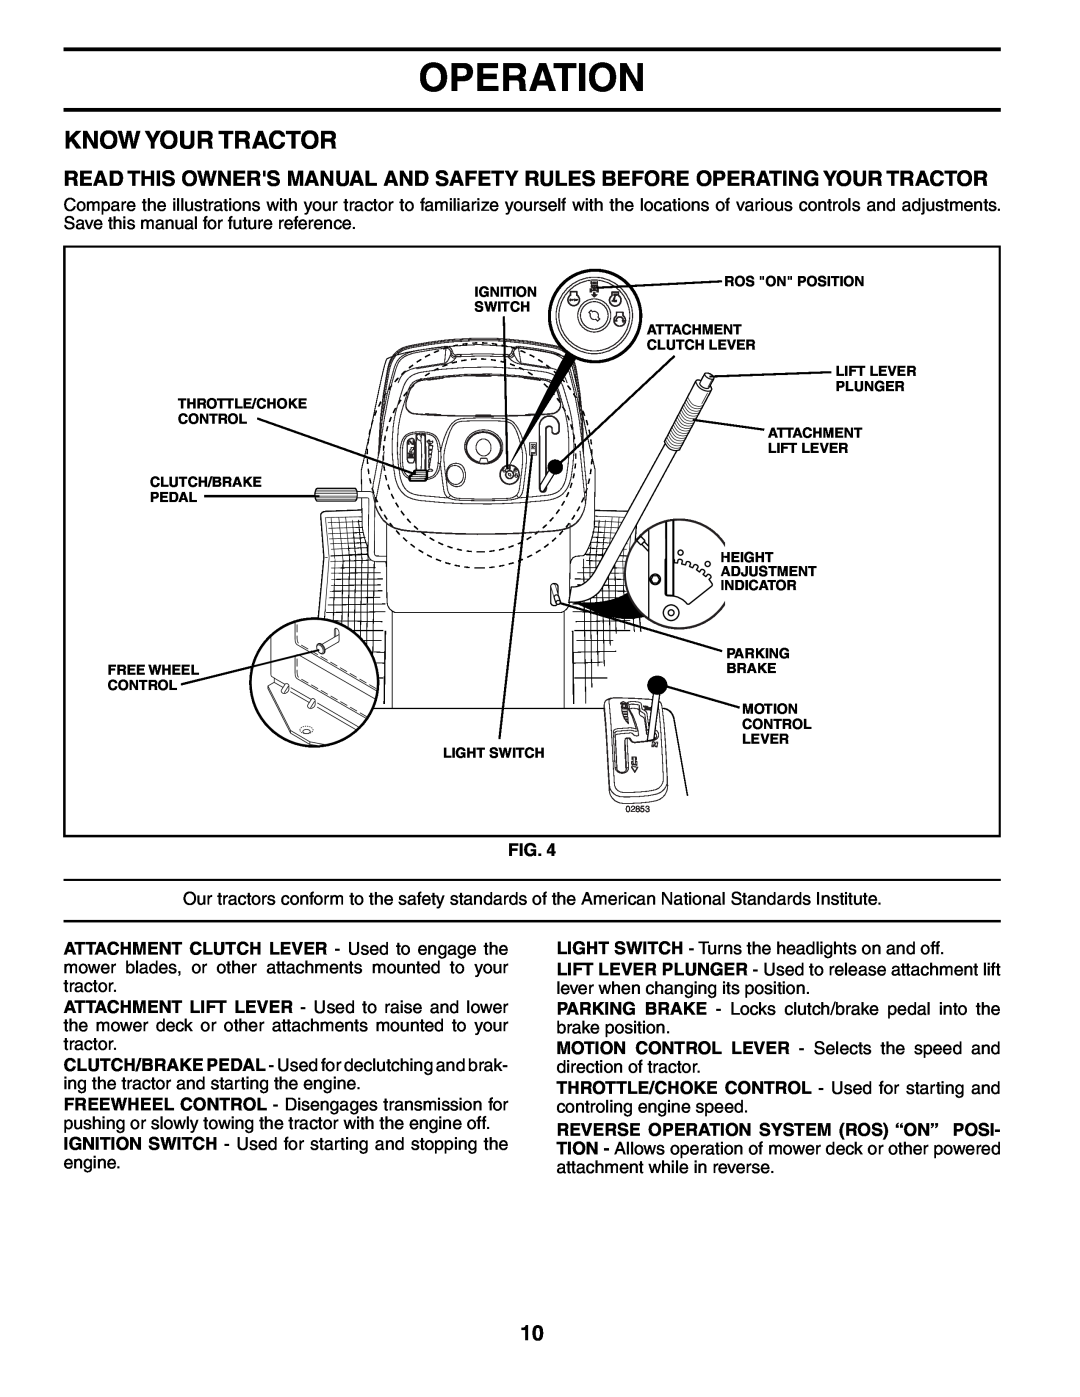 Poulan BB185H42YT manual Know Your Tractor, Operation 